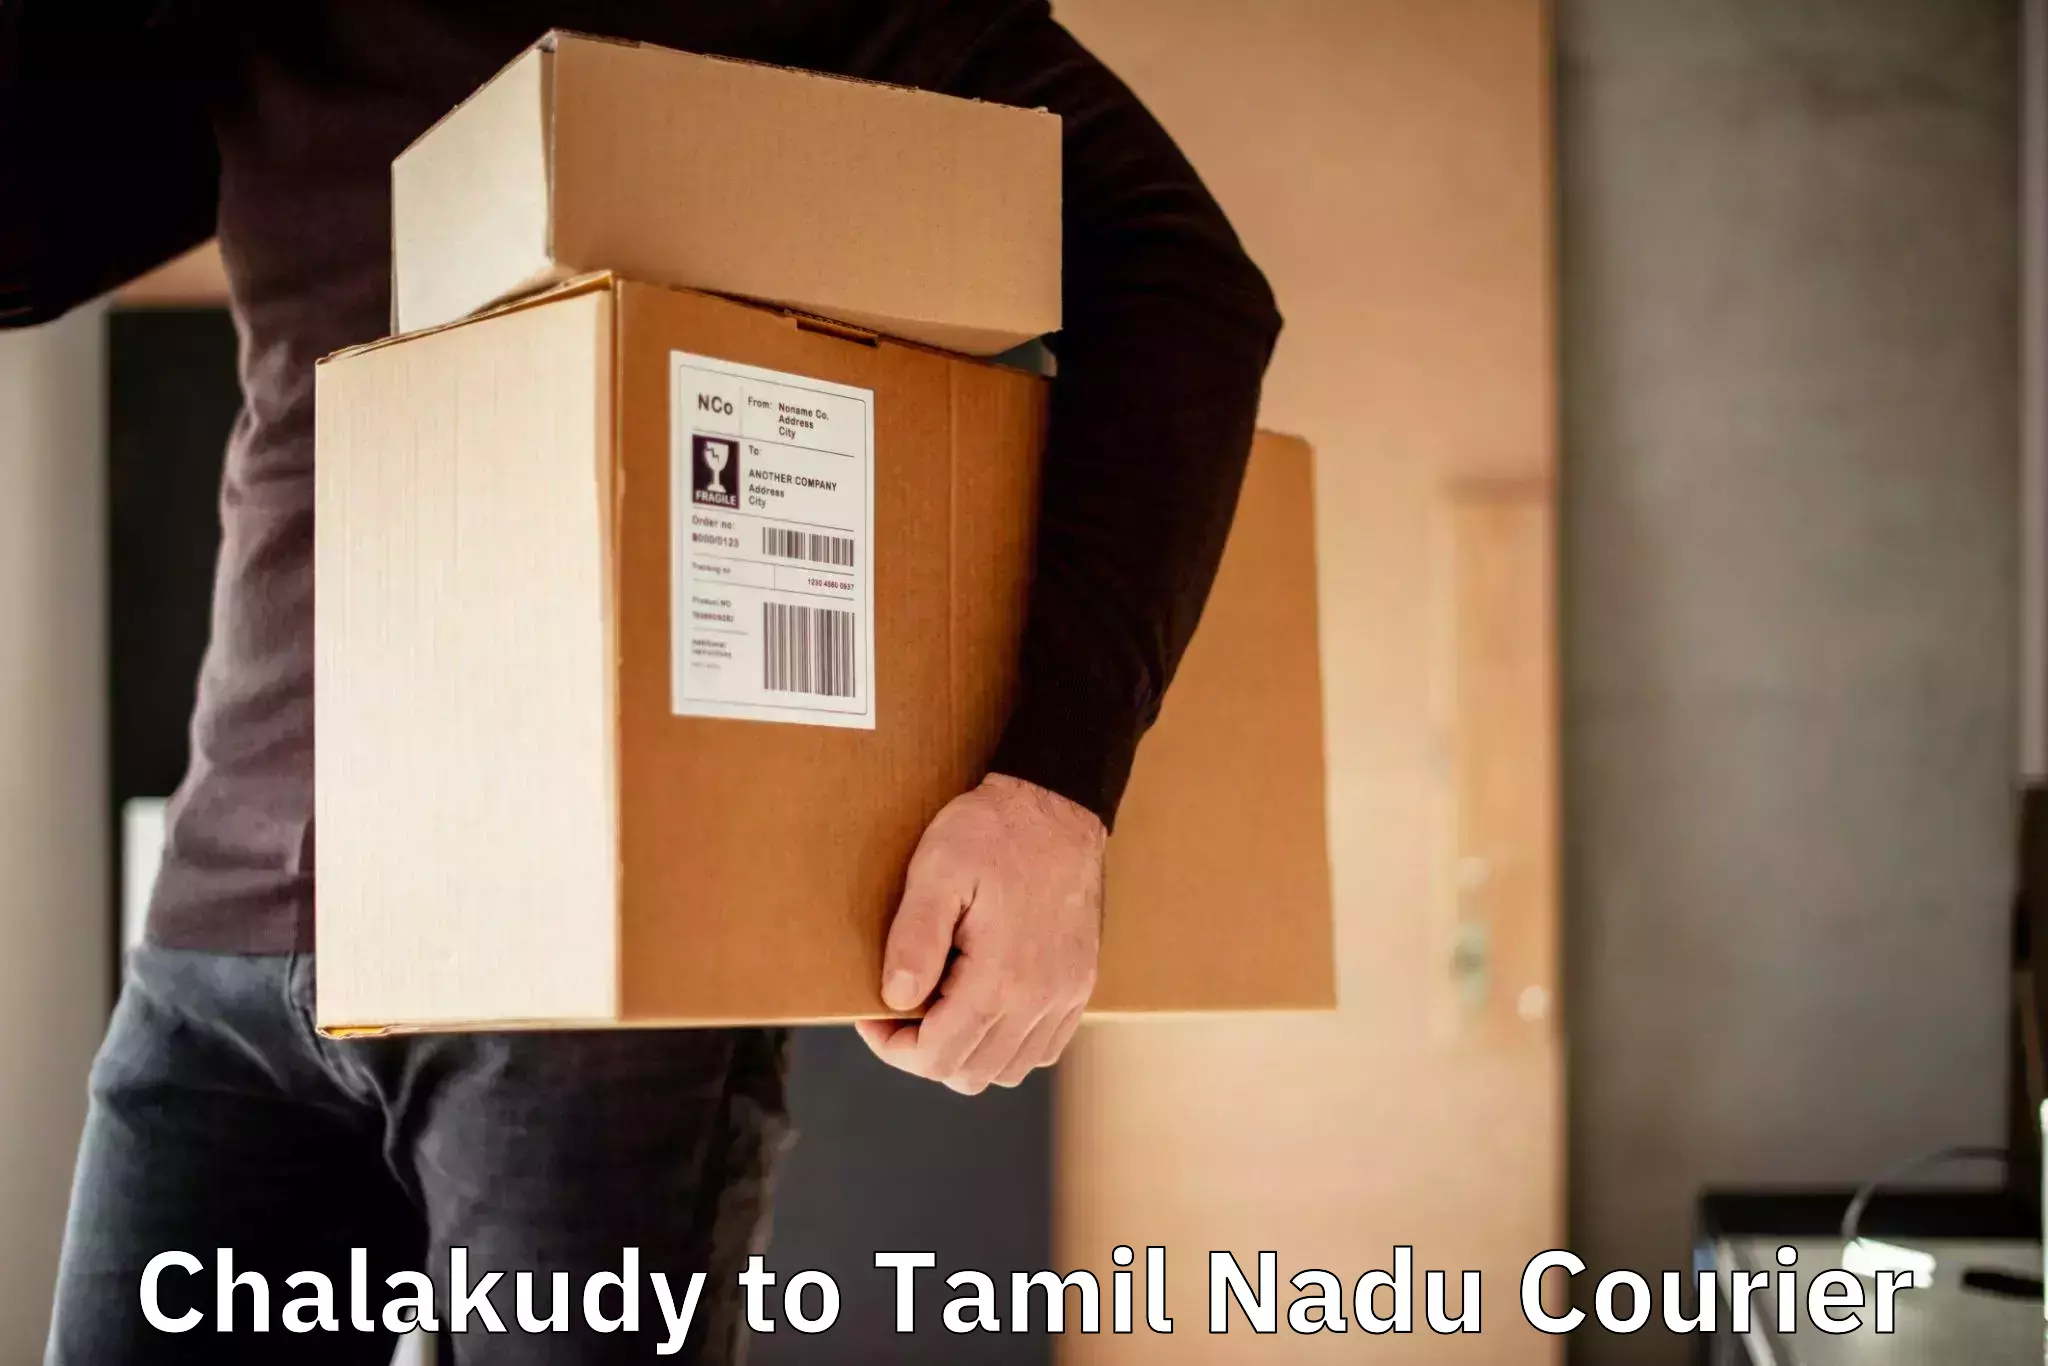 Cargo delivery service Chalakudy to Tiruchengode